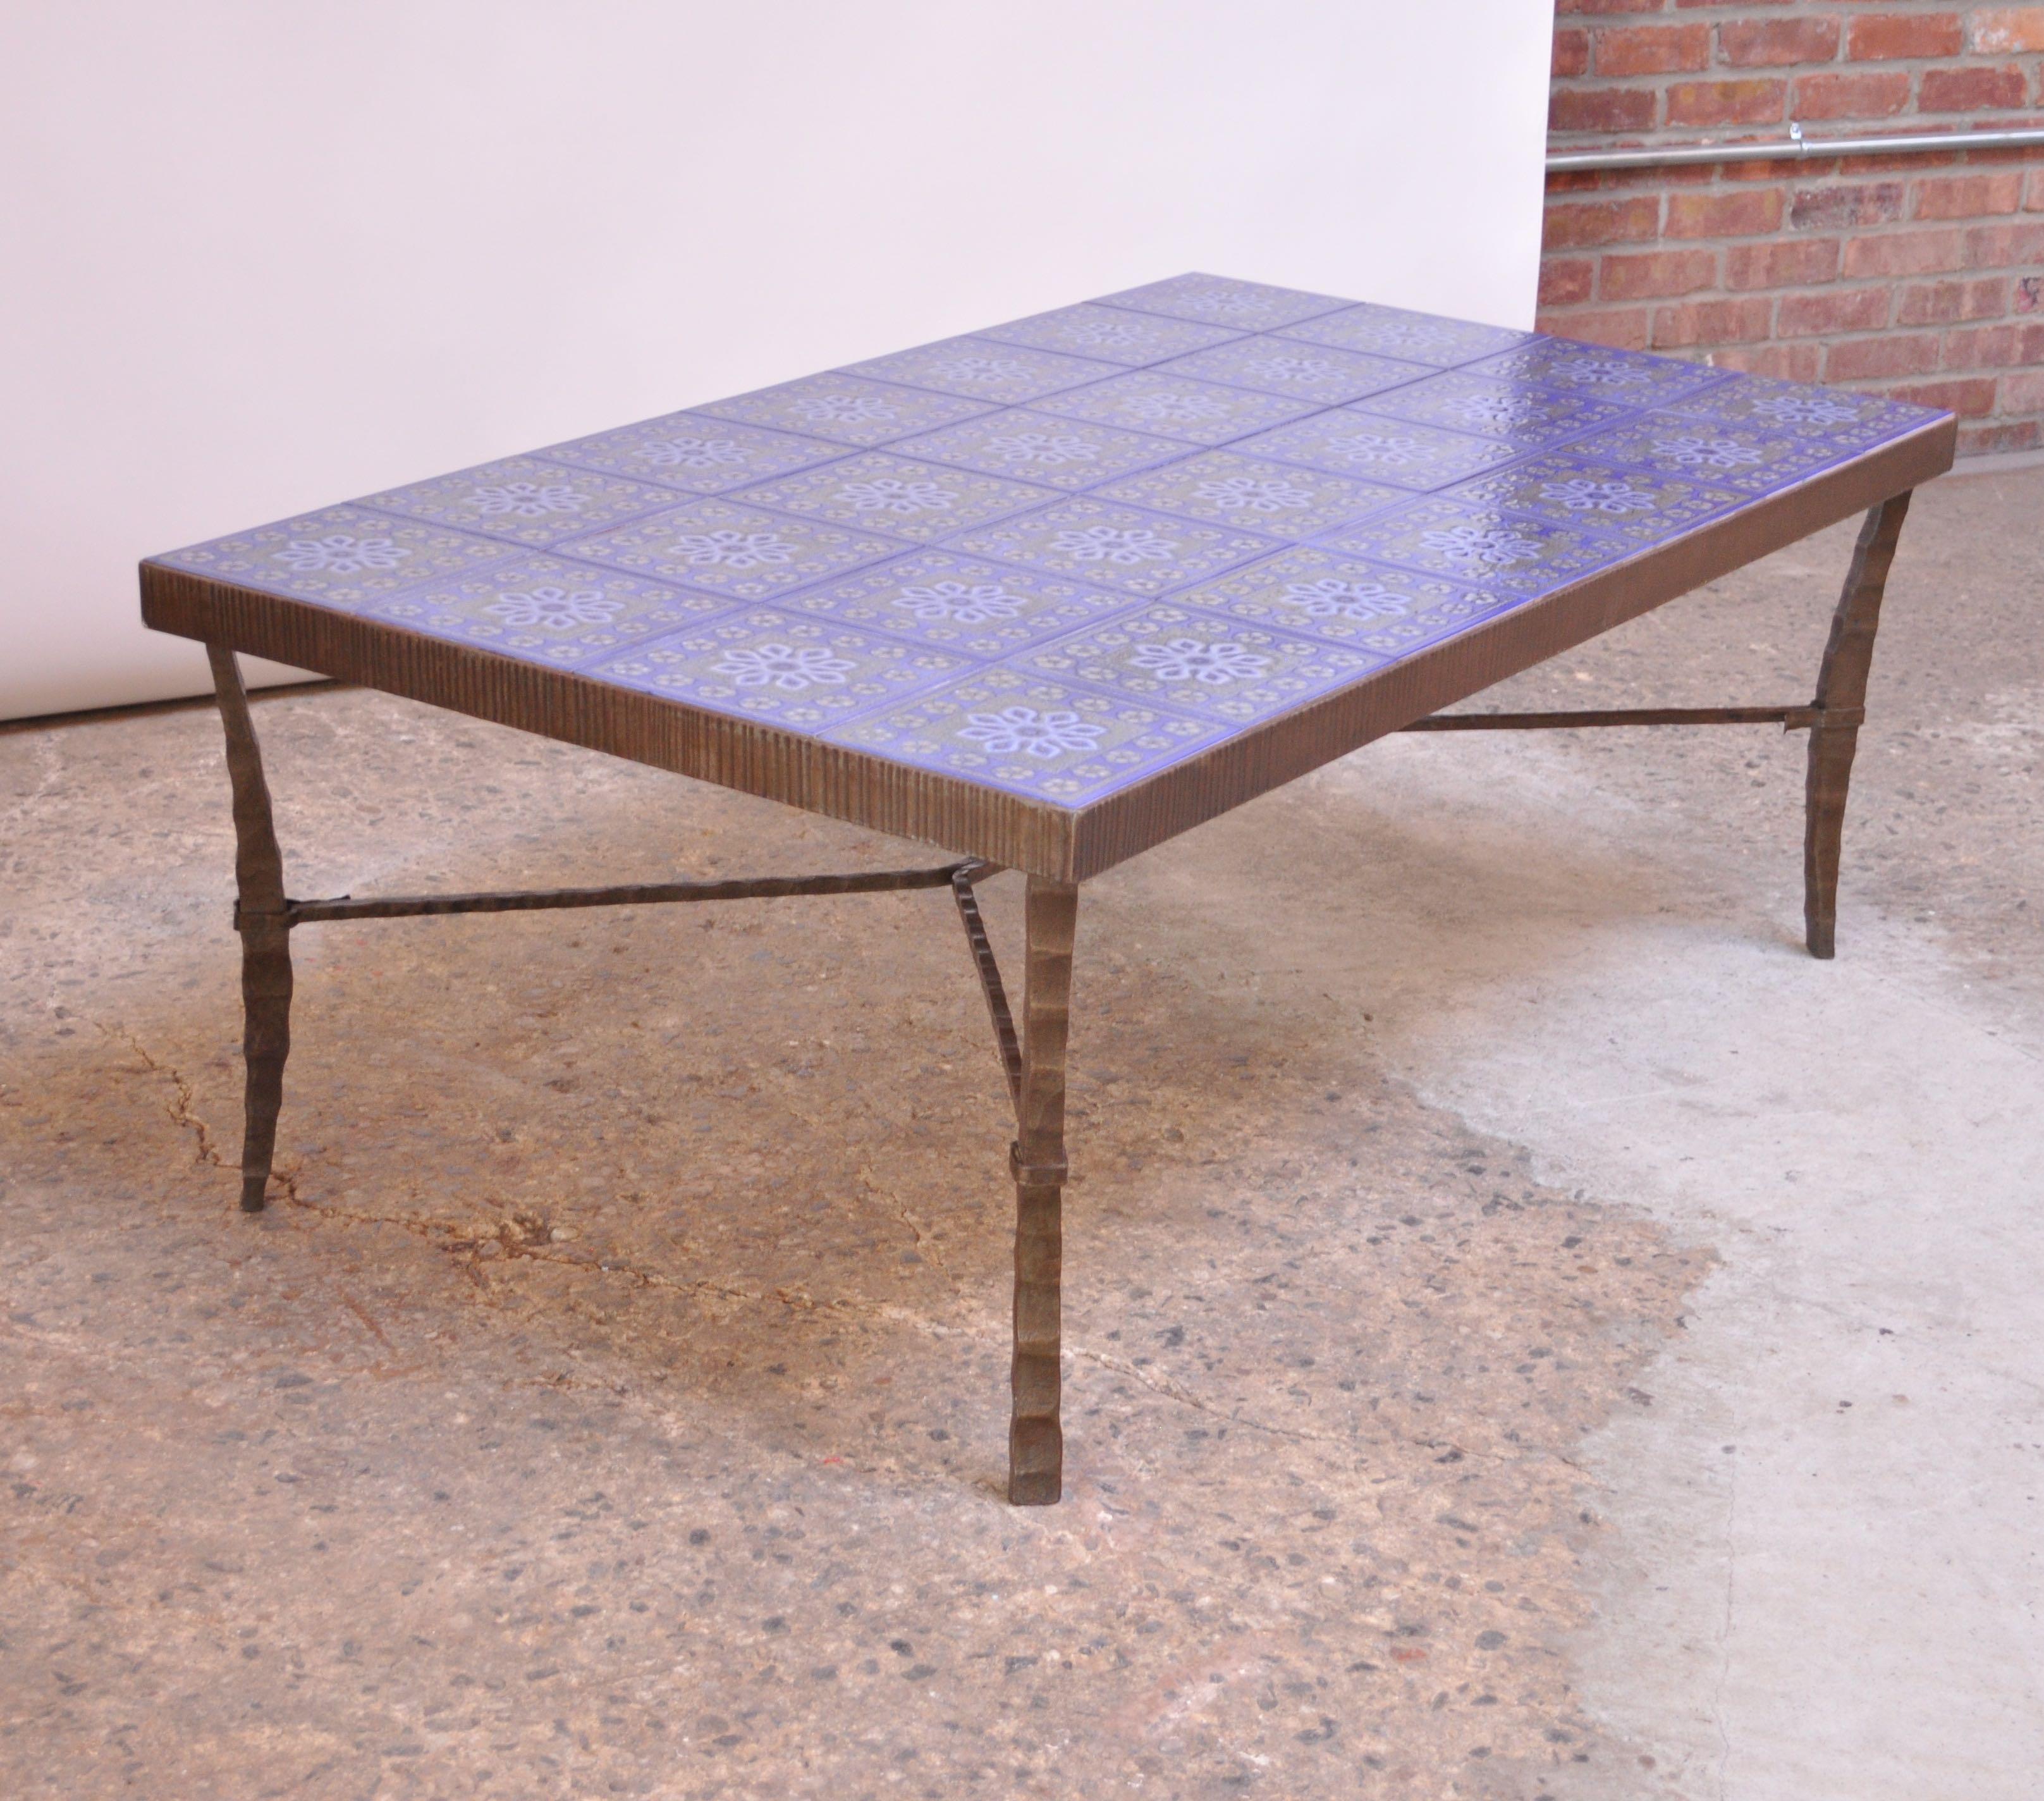 Monumental and masterful circa 1960s Scandinavian coffee table composed of a hammered / sculpted bronze frame with inset ceramic tiles in indigo with a snowflake or floral motif throughout. Color is a purple-blue, but deceptively appears more blue